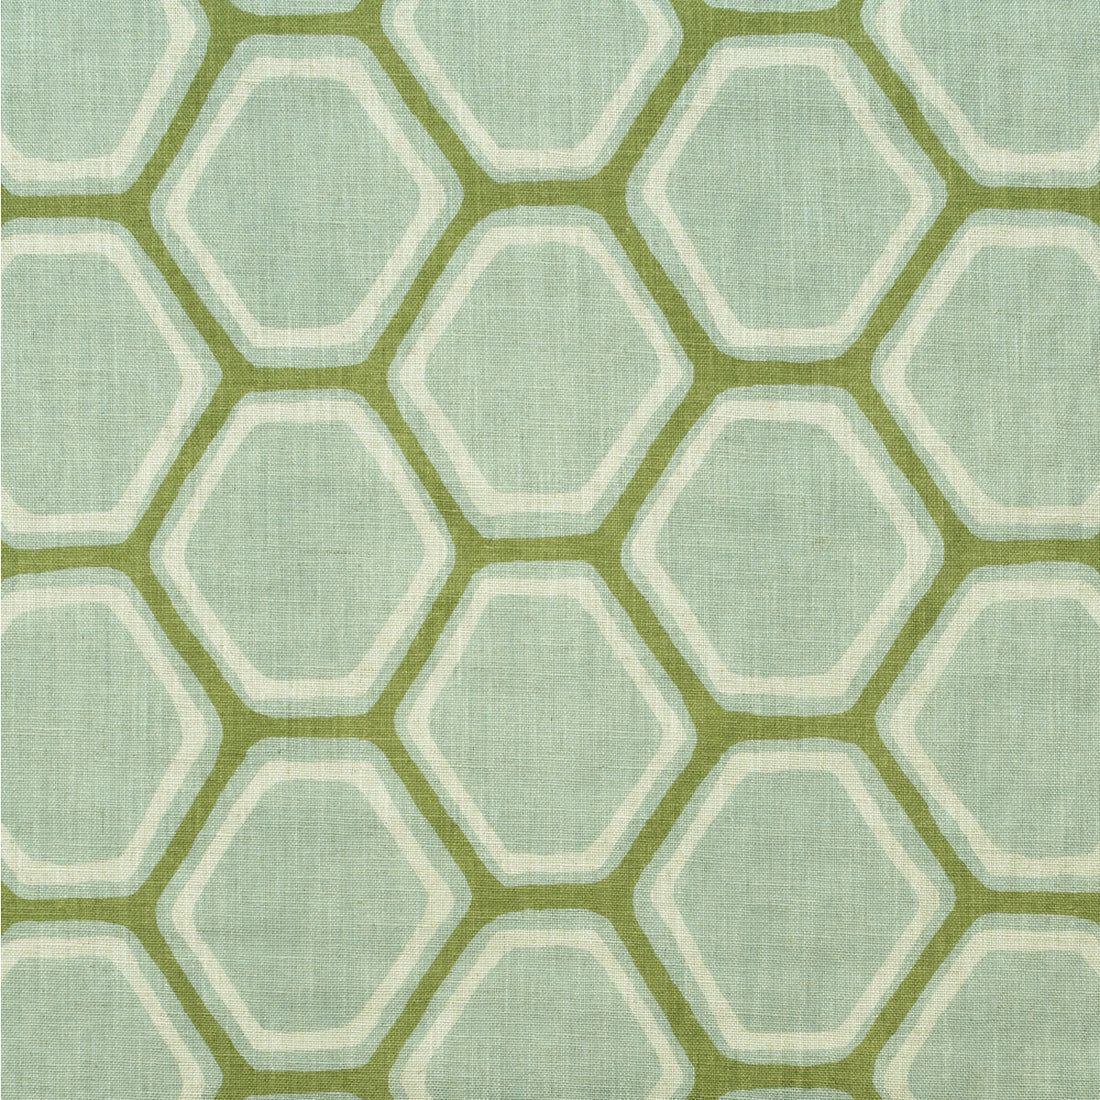 Pergola fabric in duck egg color - pattern AM100408.13.0 - by Kravet Couture in the Andrew Martin The Secret Garden collection